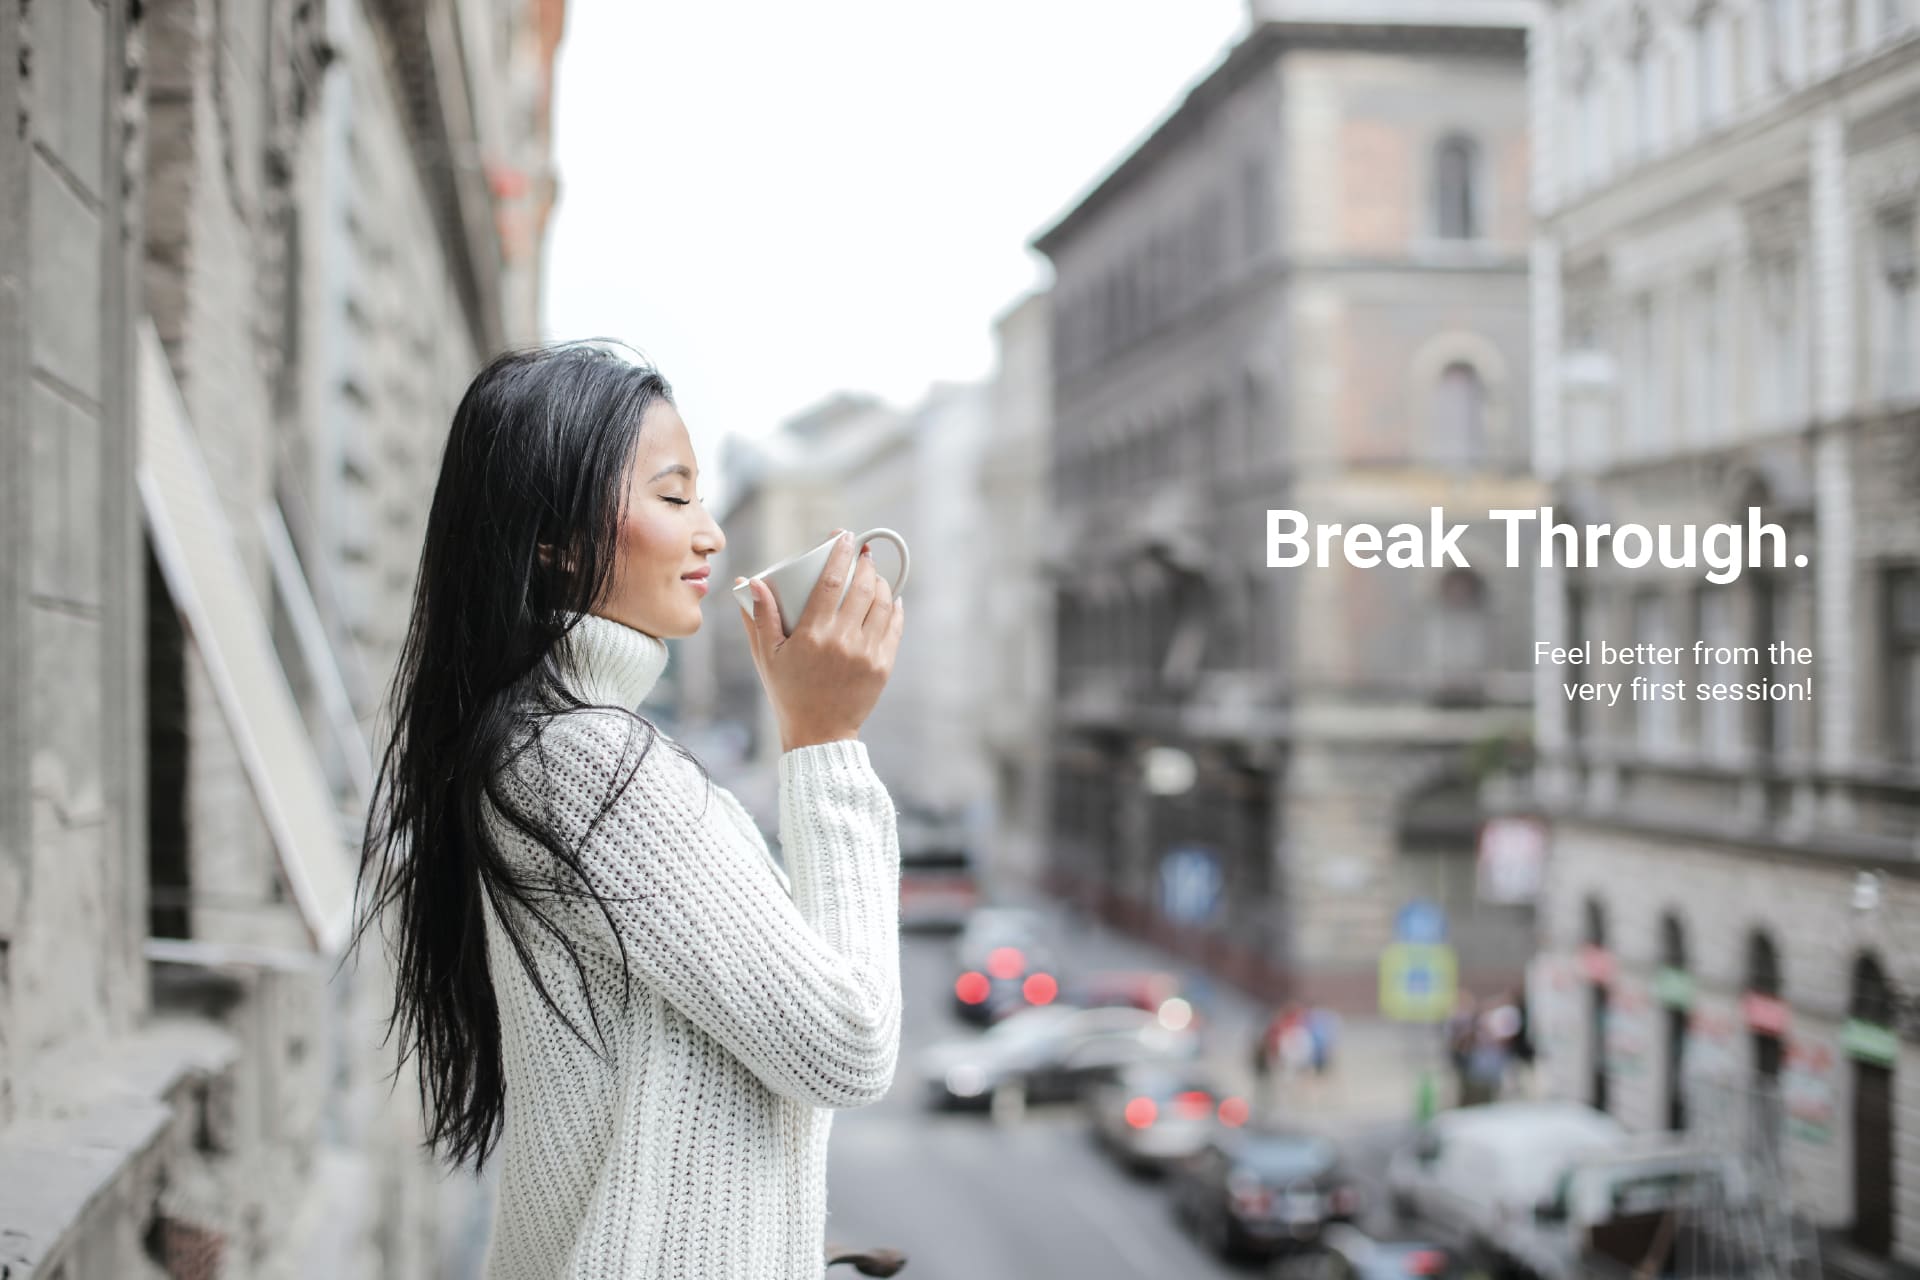 Break Through. Feel better from the very first session! Ana Lucia Lanatta - SkyandRoots - Hypnosis|Hypnose - Hypnotherapy|Hypnotherapeute - SkyandRoots.com